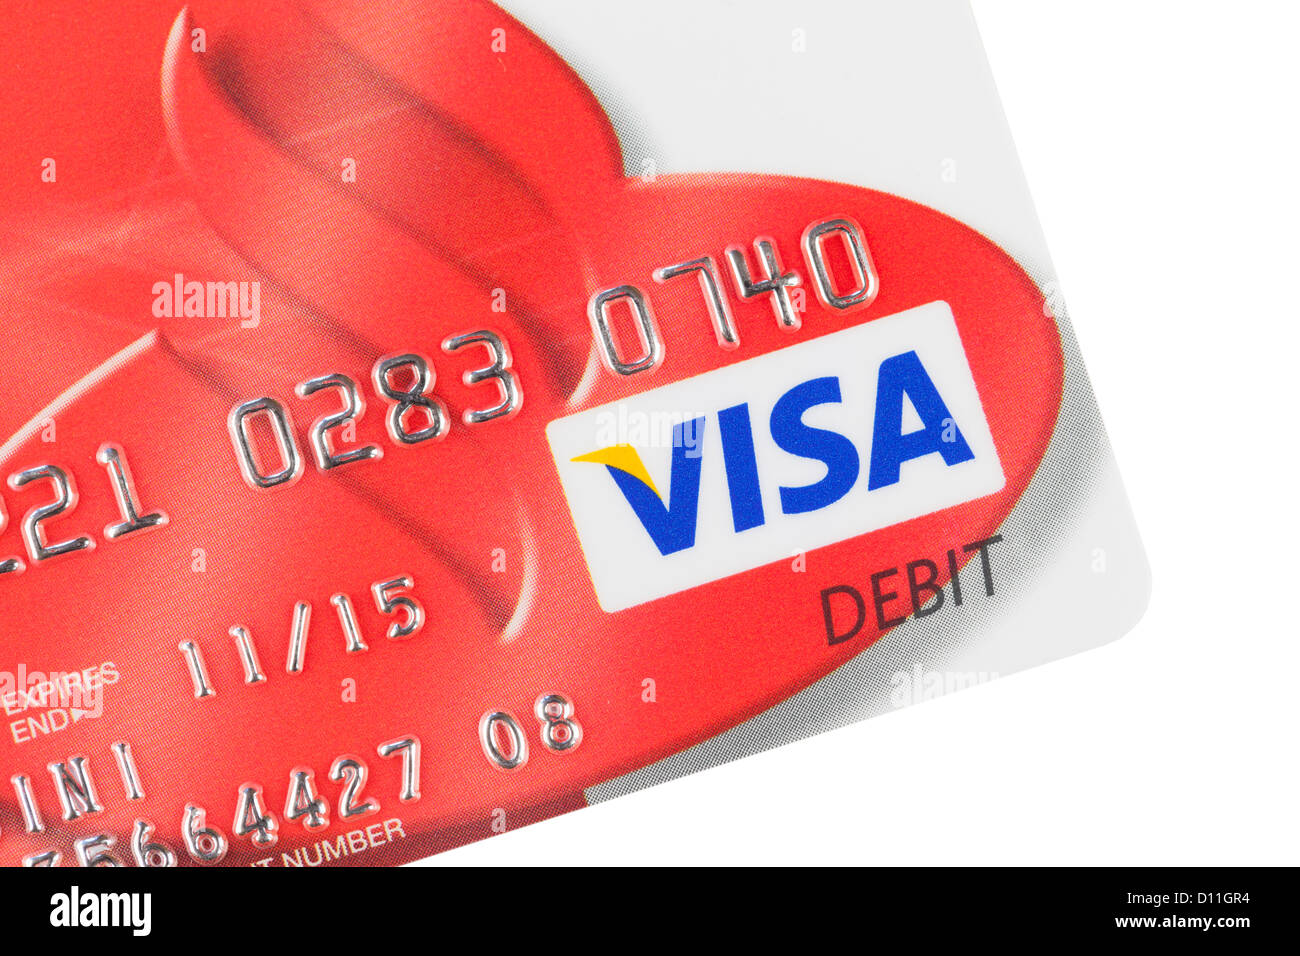 Credit card personal details Stock Photo